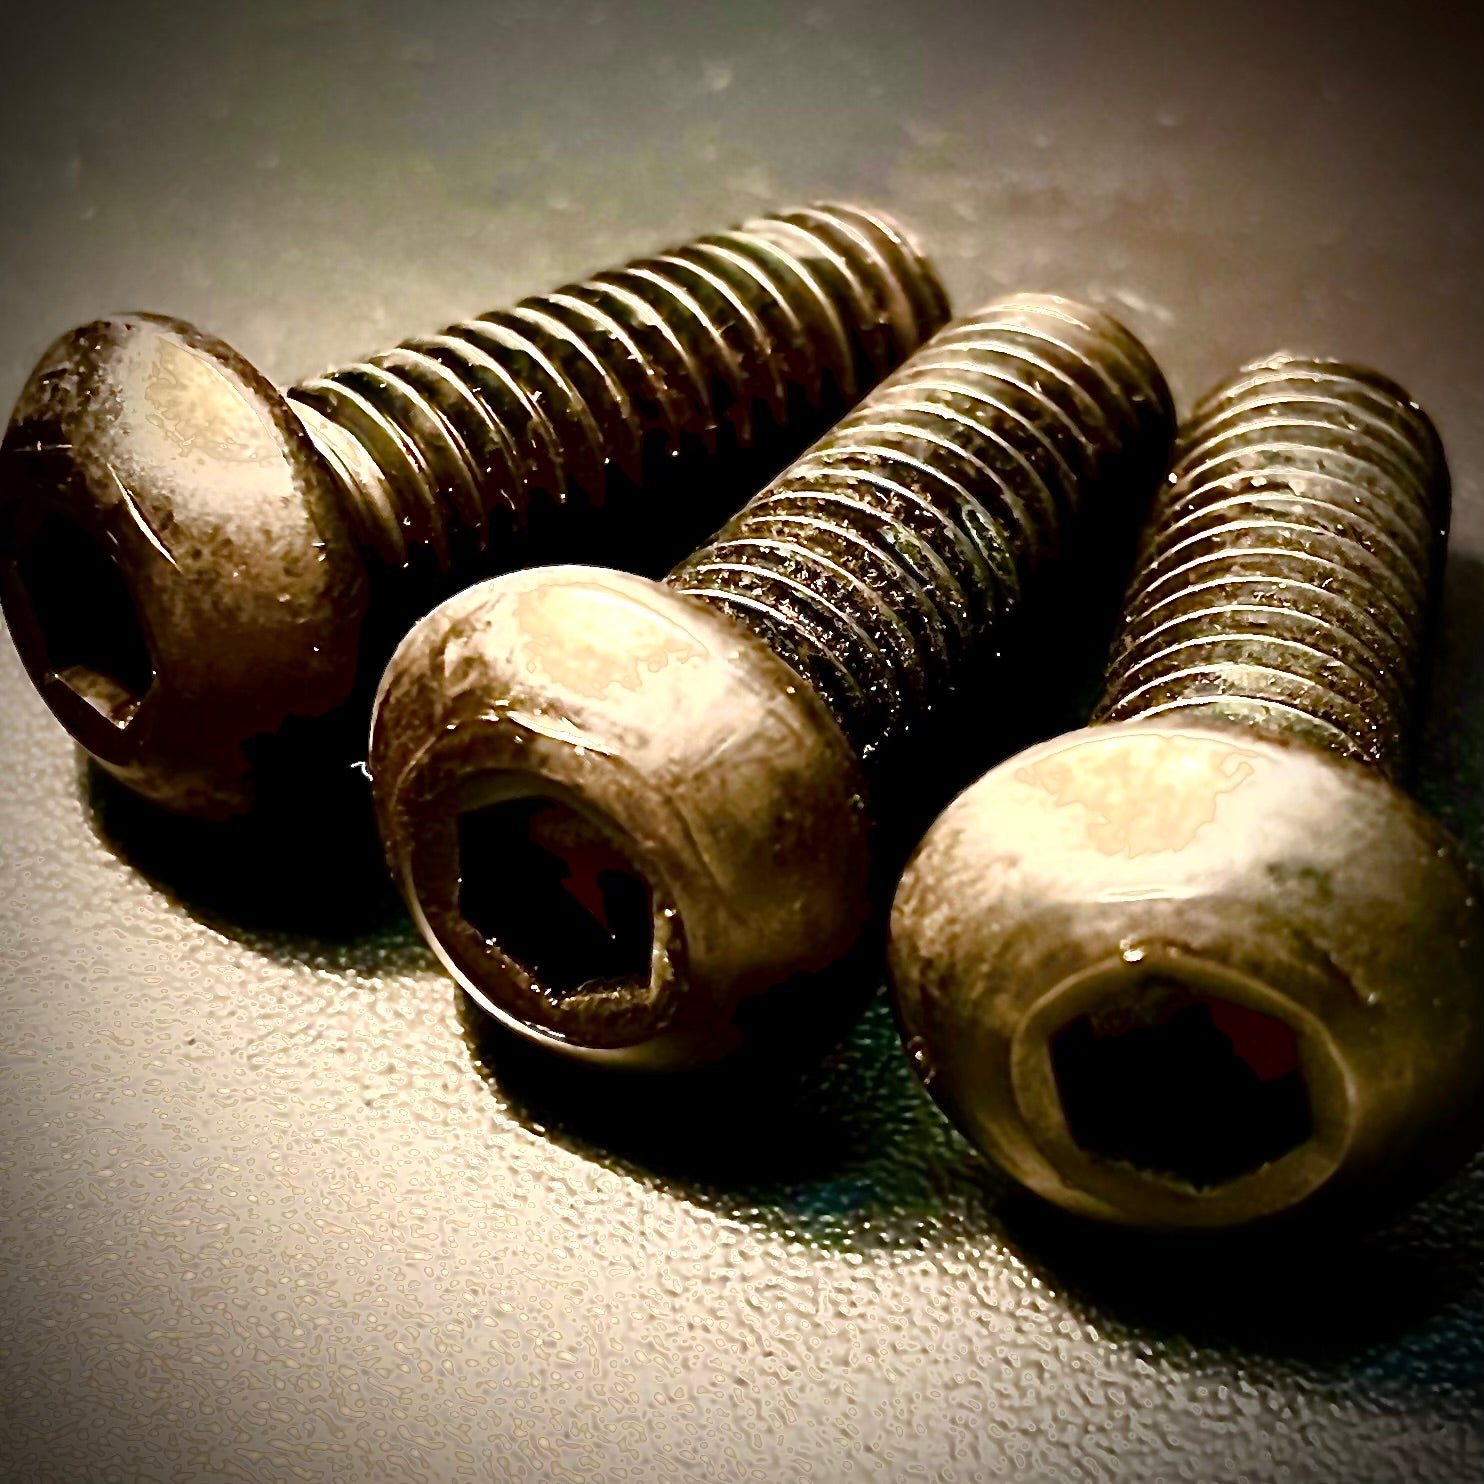 BSW 1/2" Socket Screw Button High Tensile 10.9 Self-Colour - Fixaball Ltd. Fixings and Fasteners UK